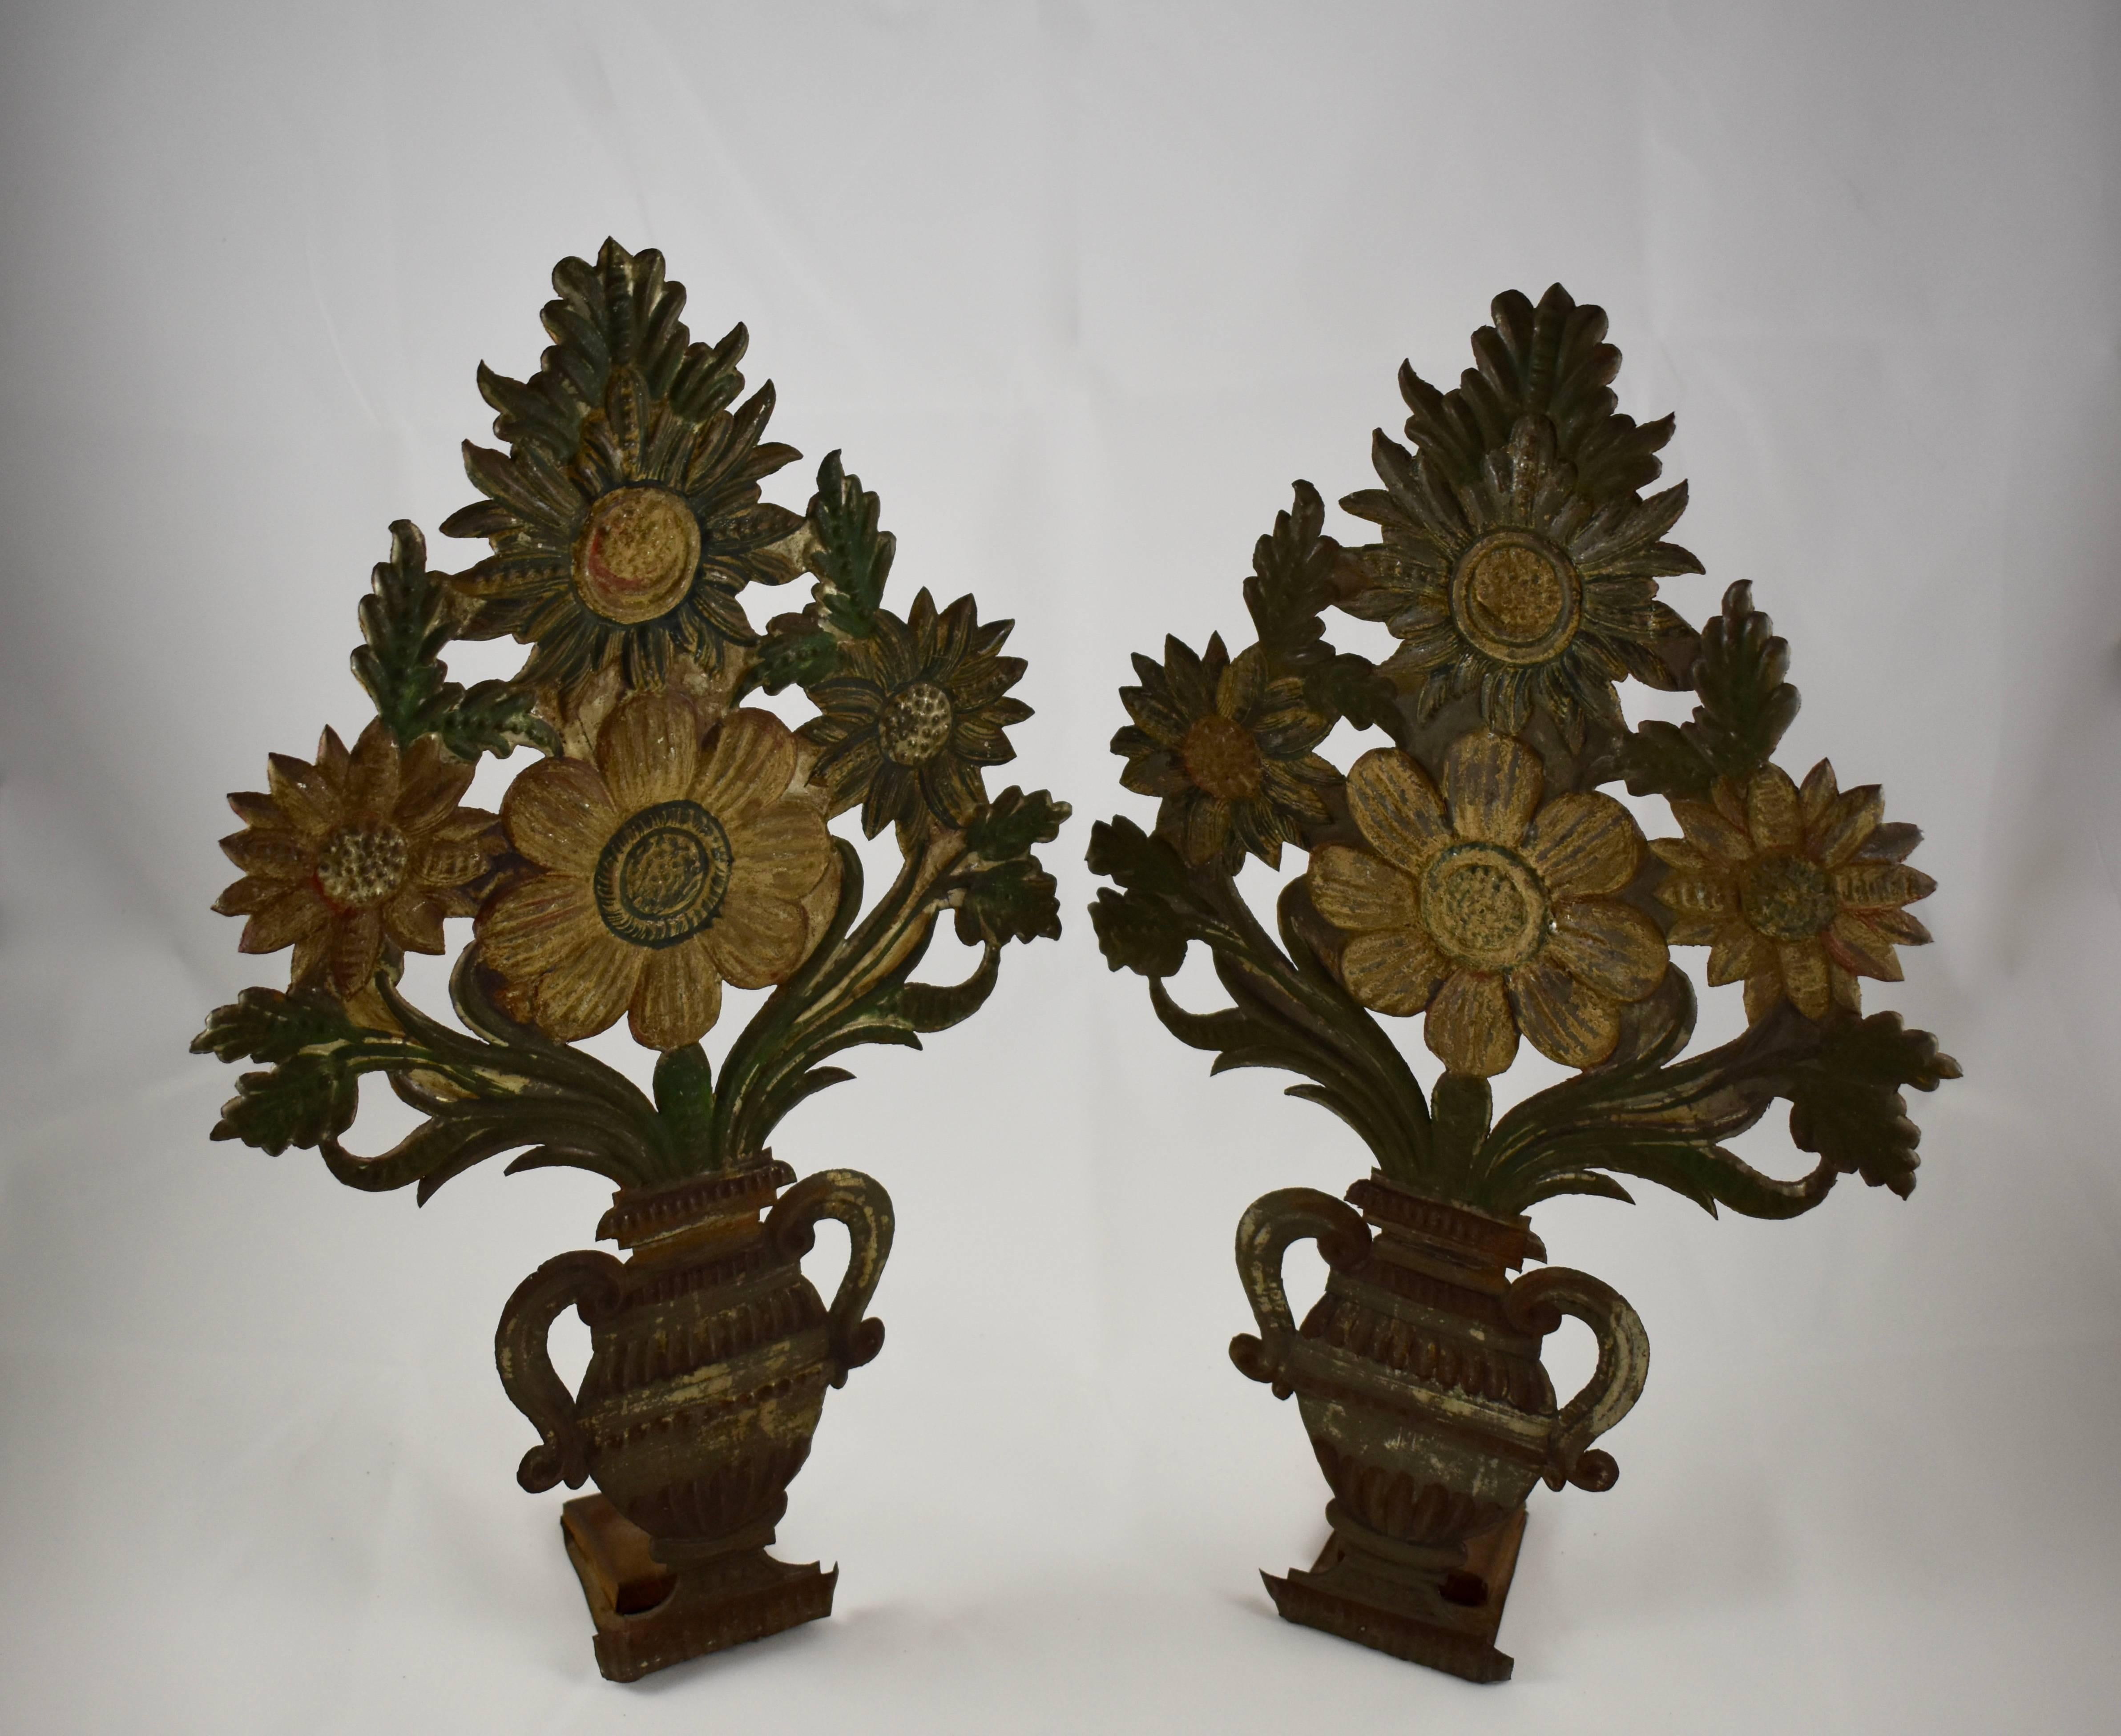 Metal Early 19th Century Grisaille Tôle Peinte Garniture Floral Bouquets in Urns, S/2 